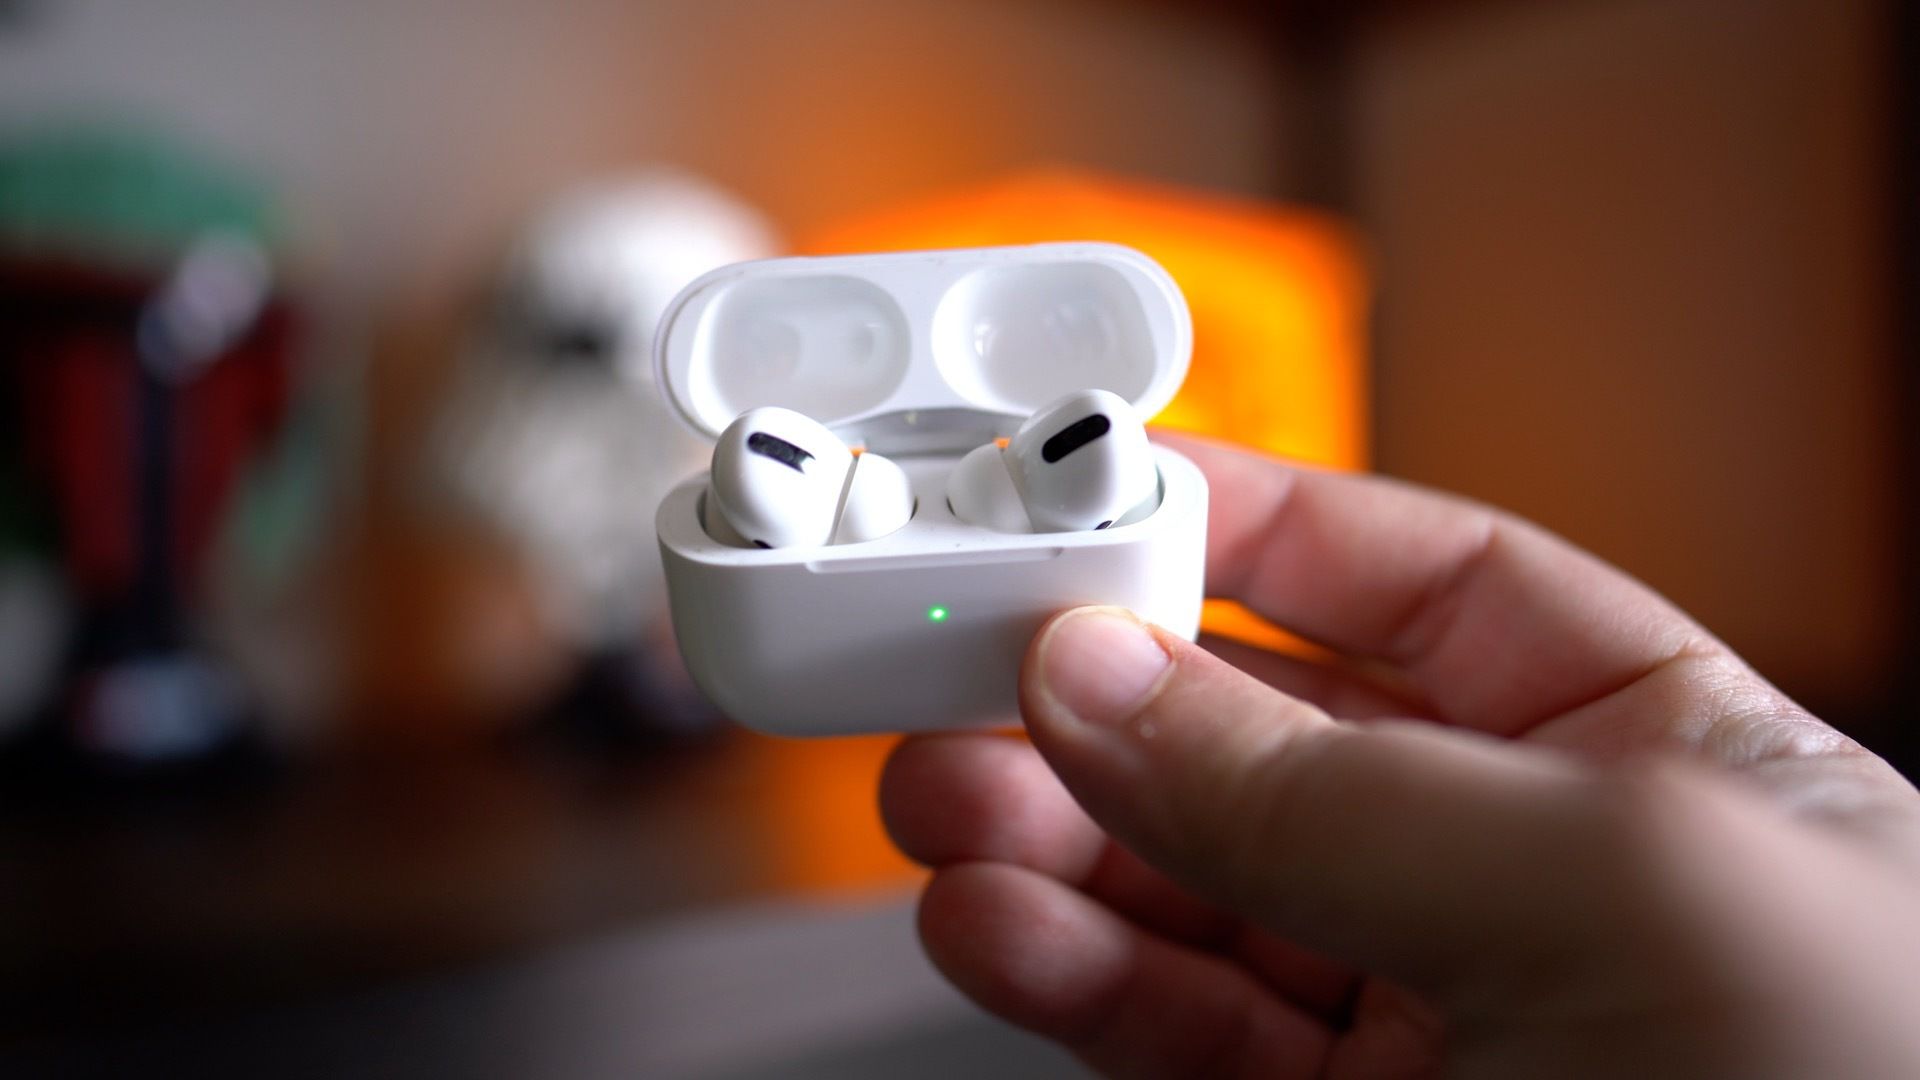 AirPods overwhelmingly dominate the global wireless headset market